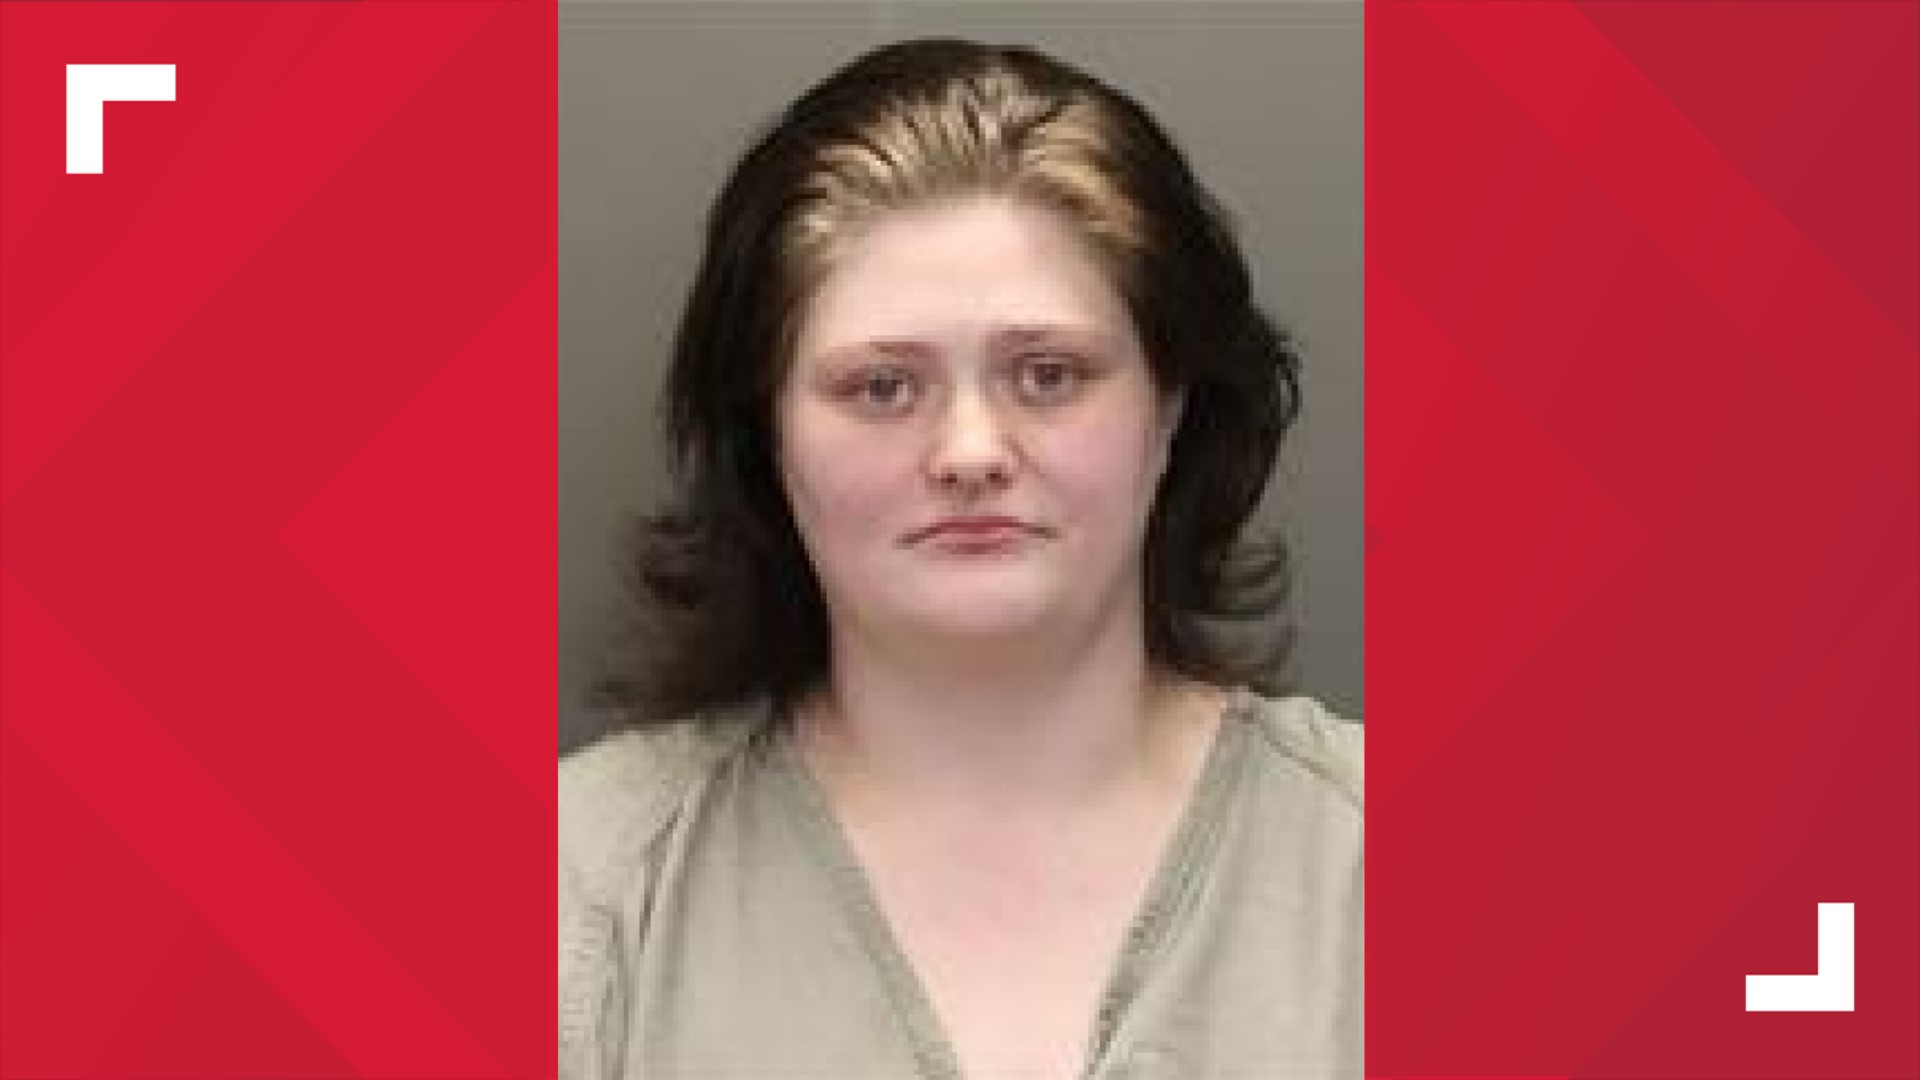 The foster mother was arrested Wednesday and is facing additional charges related to animal cruelty. The foster father remains at large.